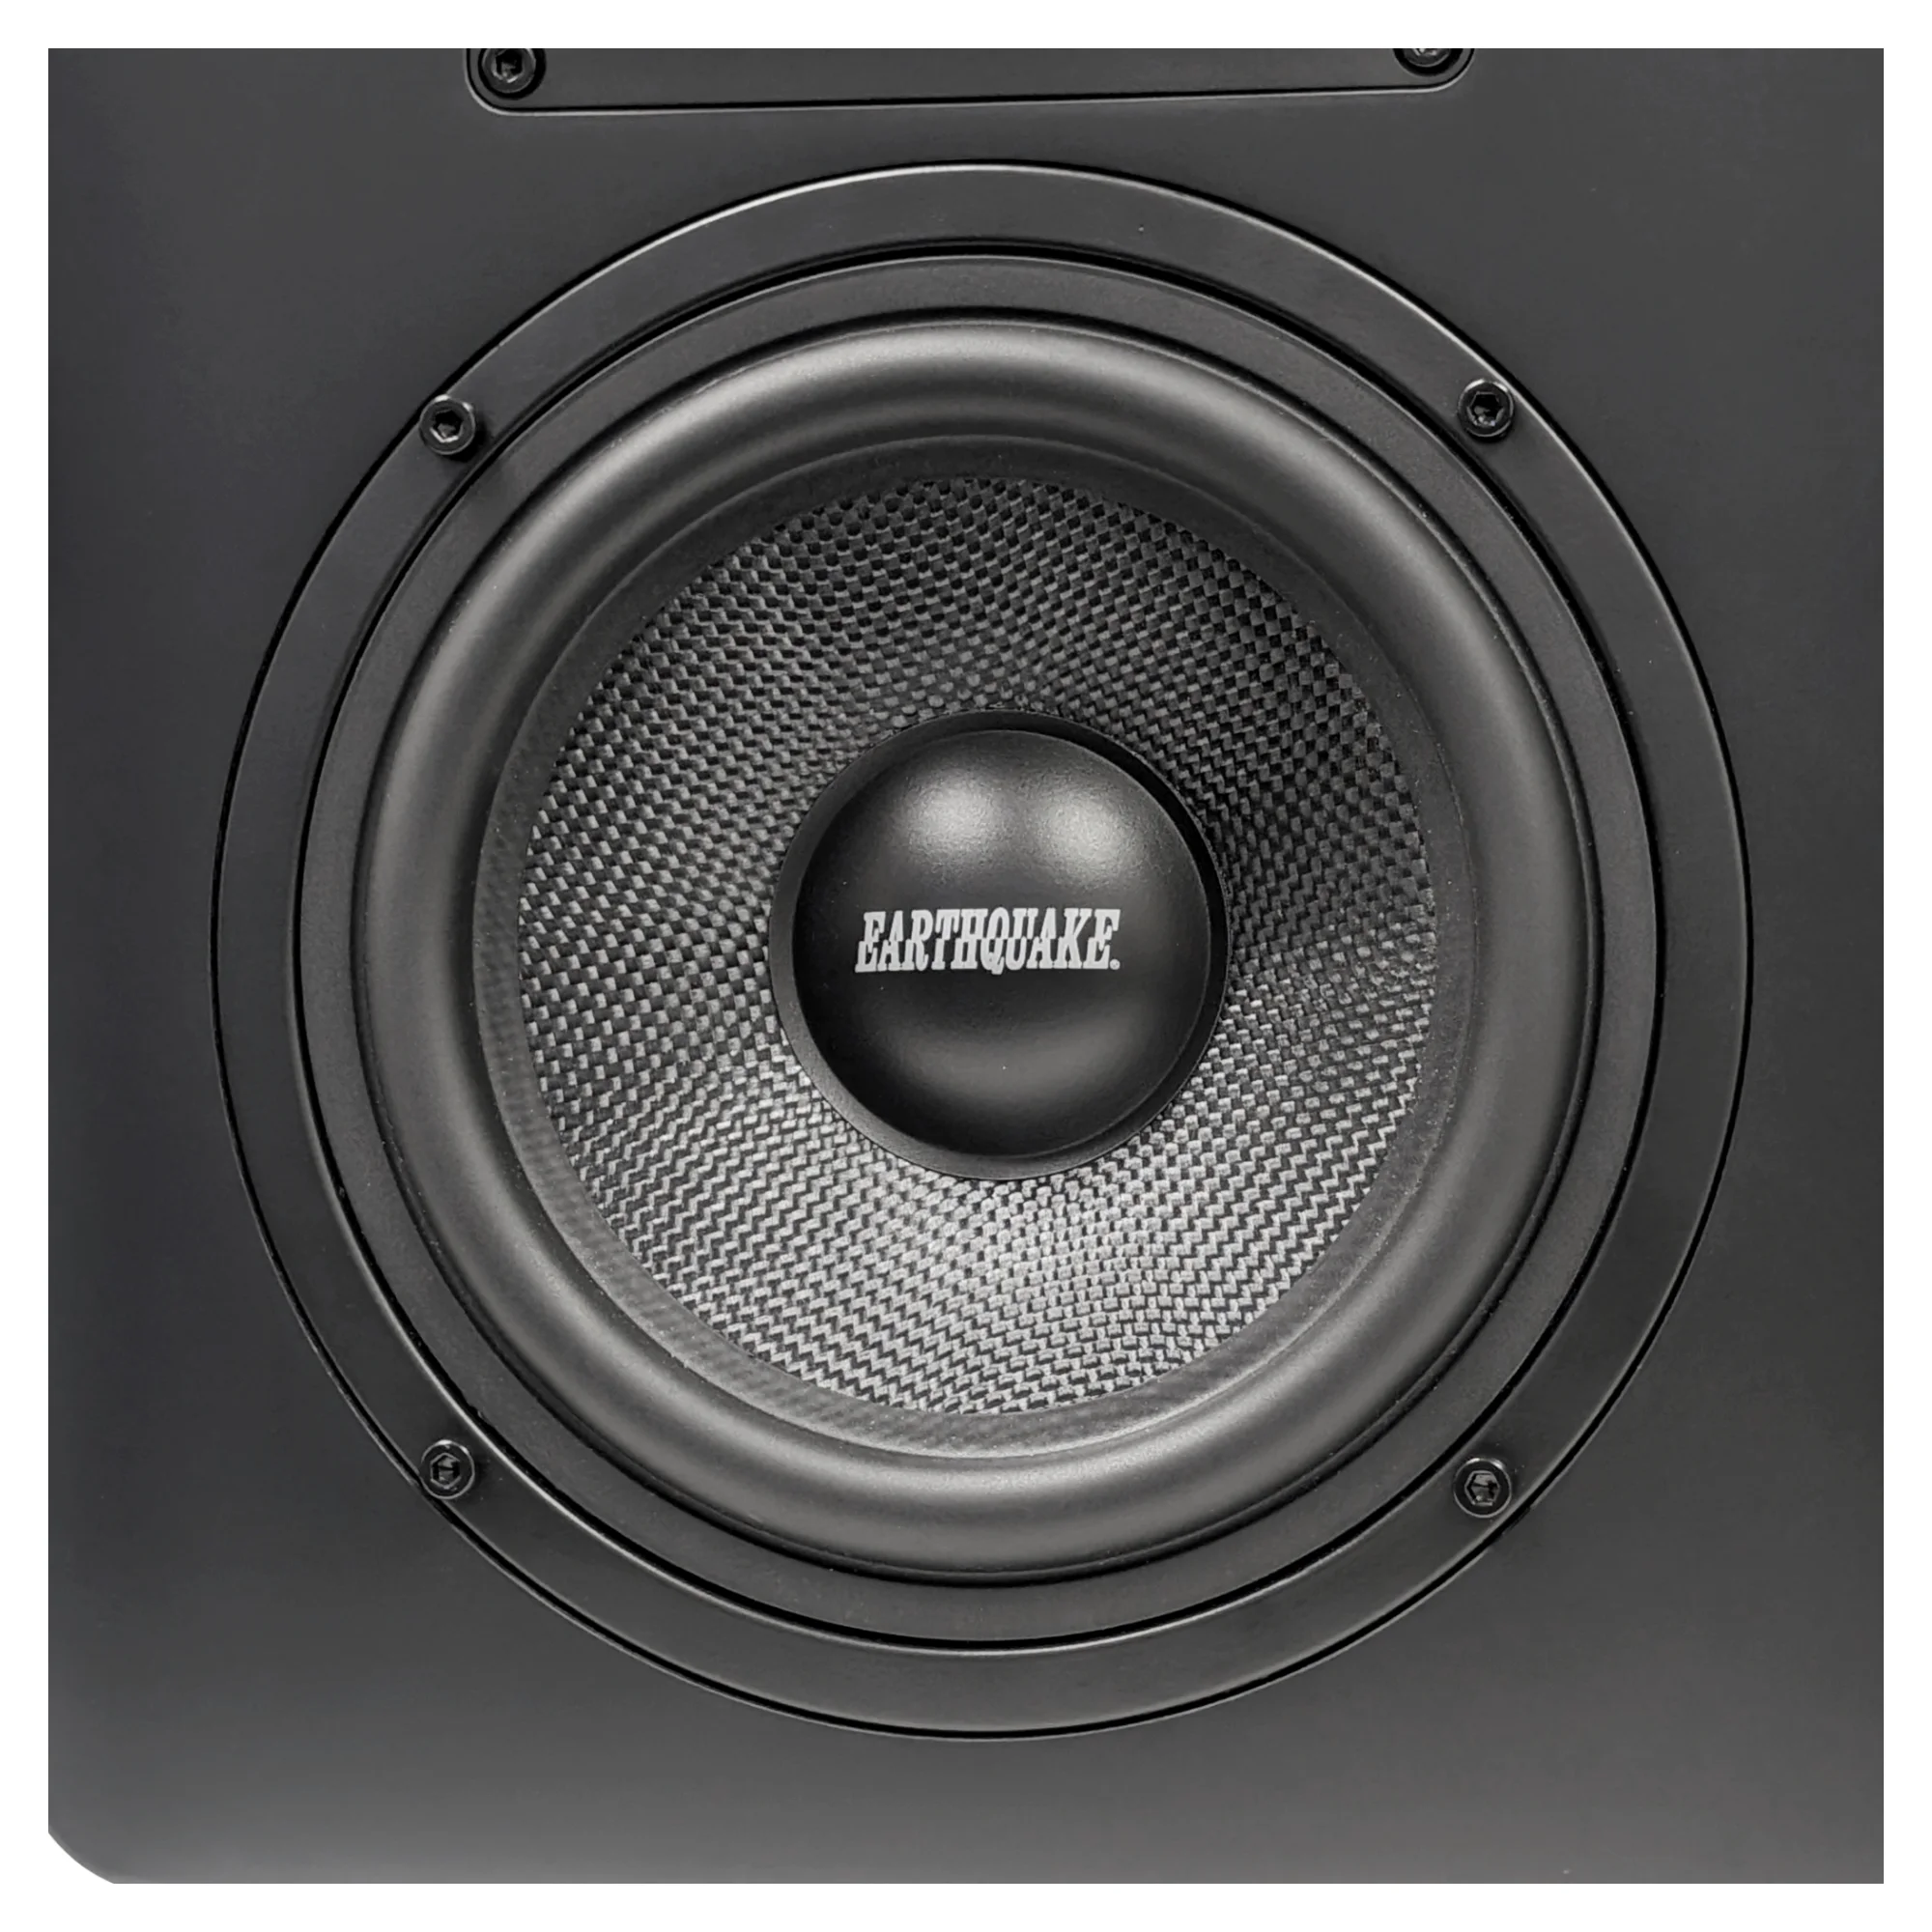 Close-up image of the carbon fiber cone woofer of the Earthquake SM6BT Professional Studio Monitor speaker.